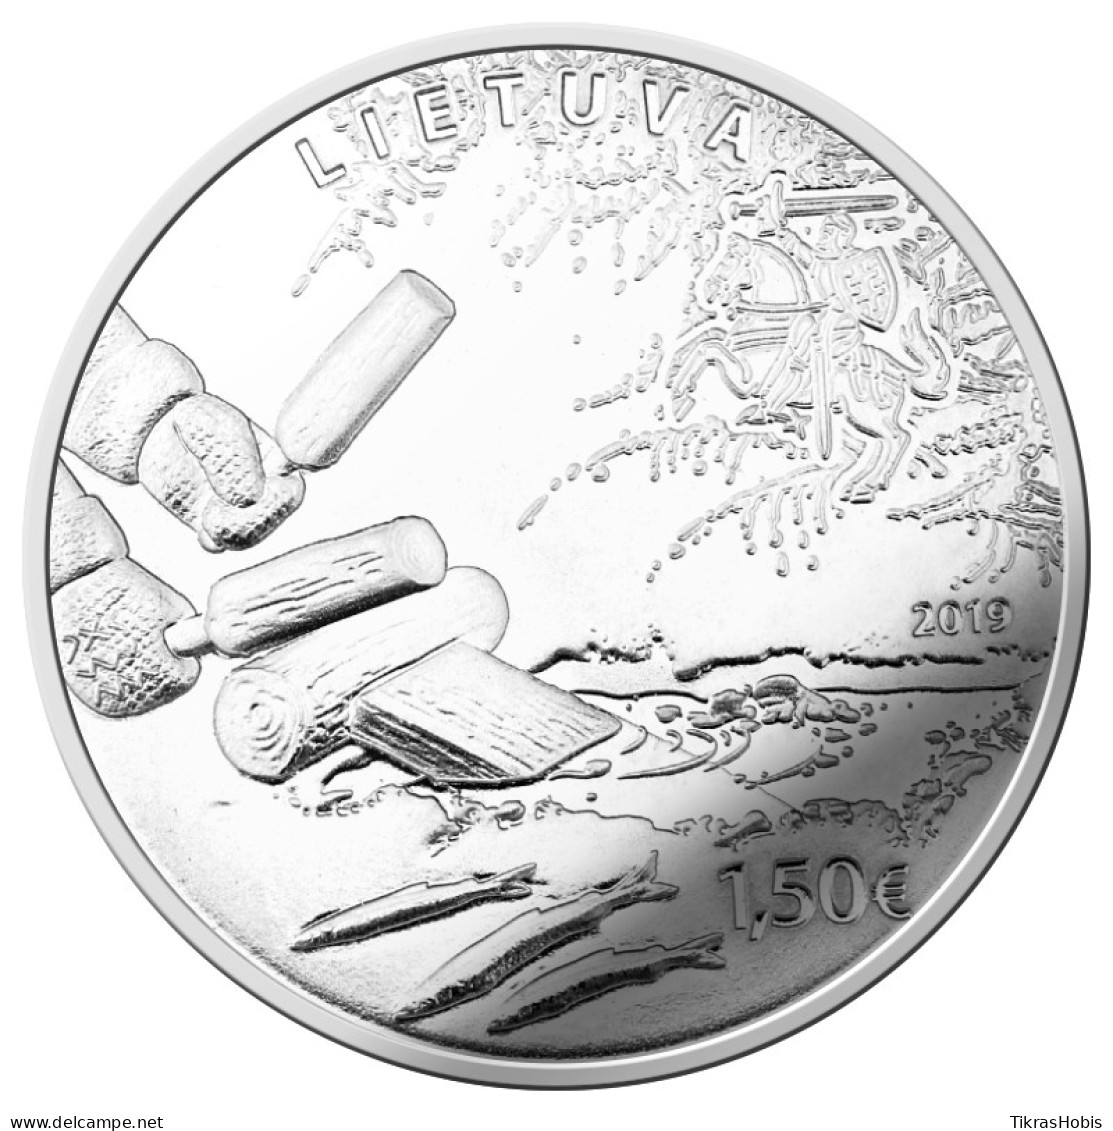 Lithuania 1,50 Euro, 2019 Stint Fishing In Enticing - Lithuania